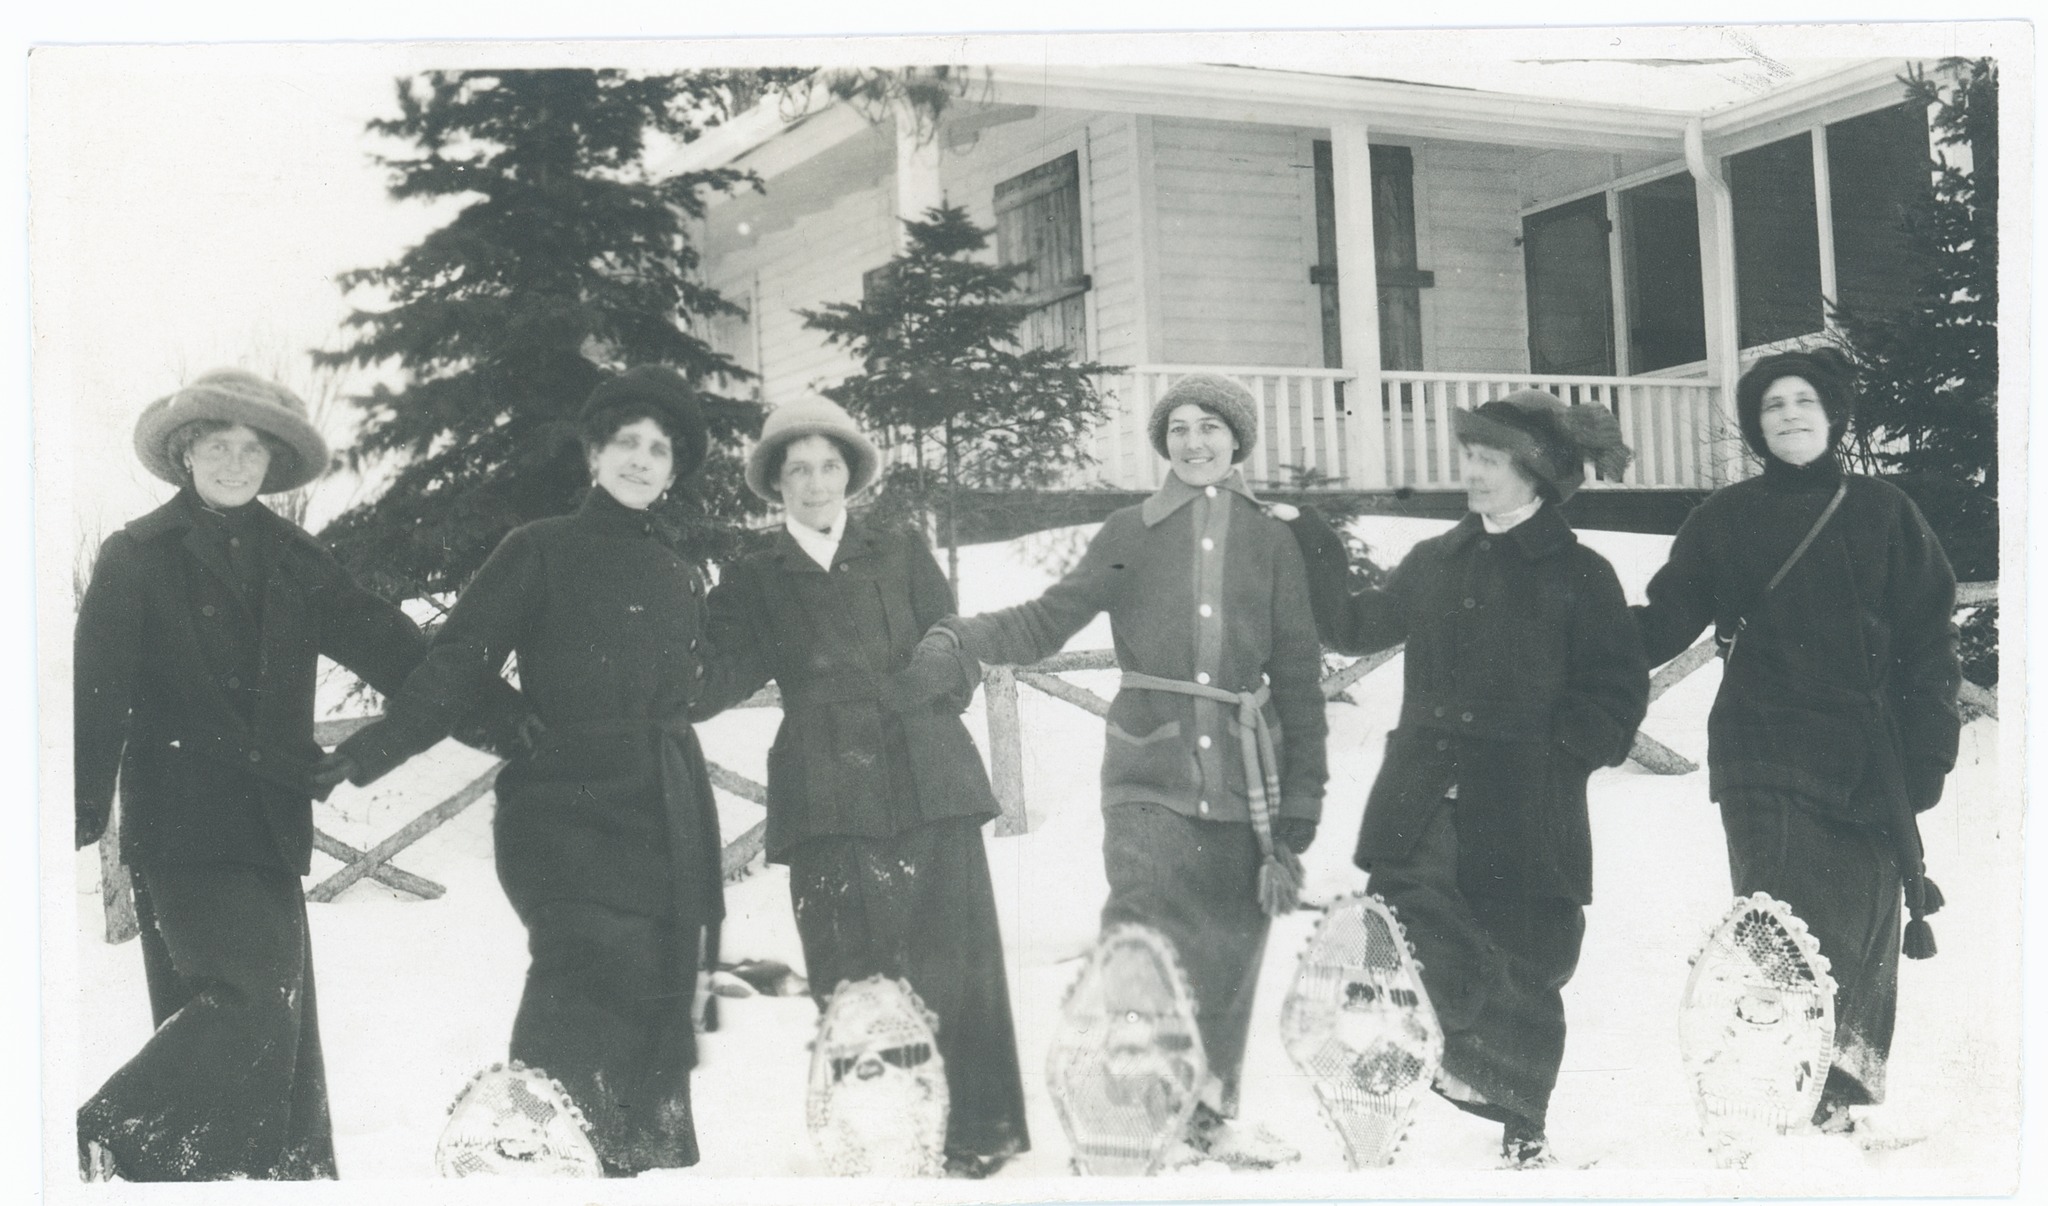 A black and white photograph of six snowshoers in Kenora. C1920s.